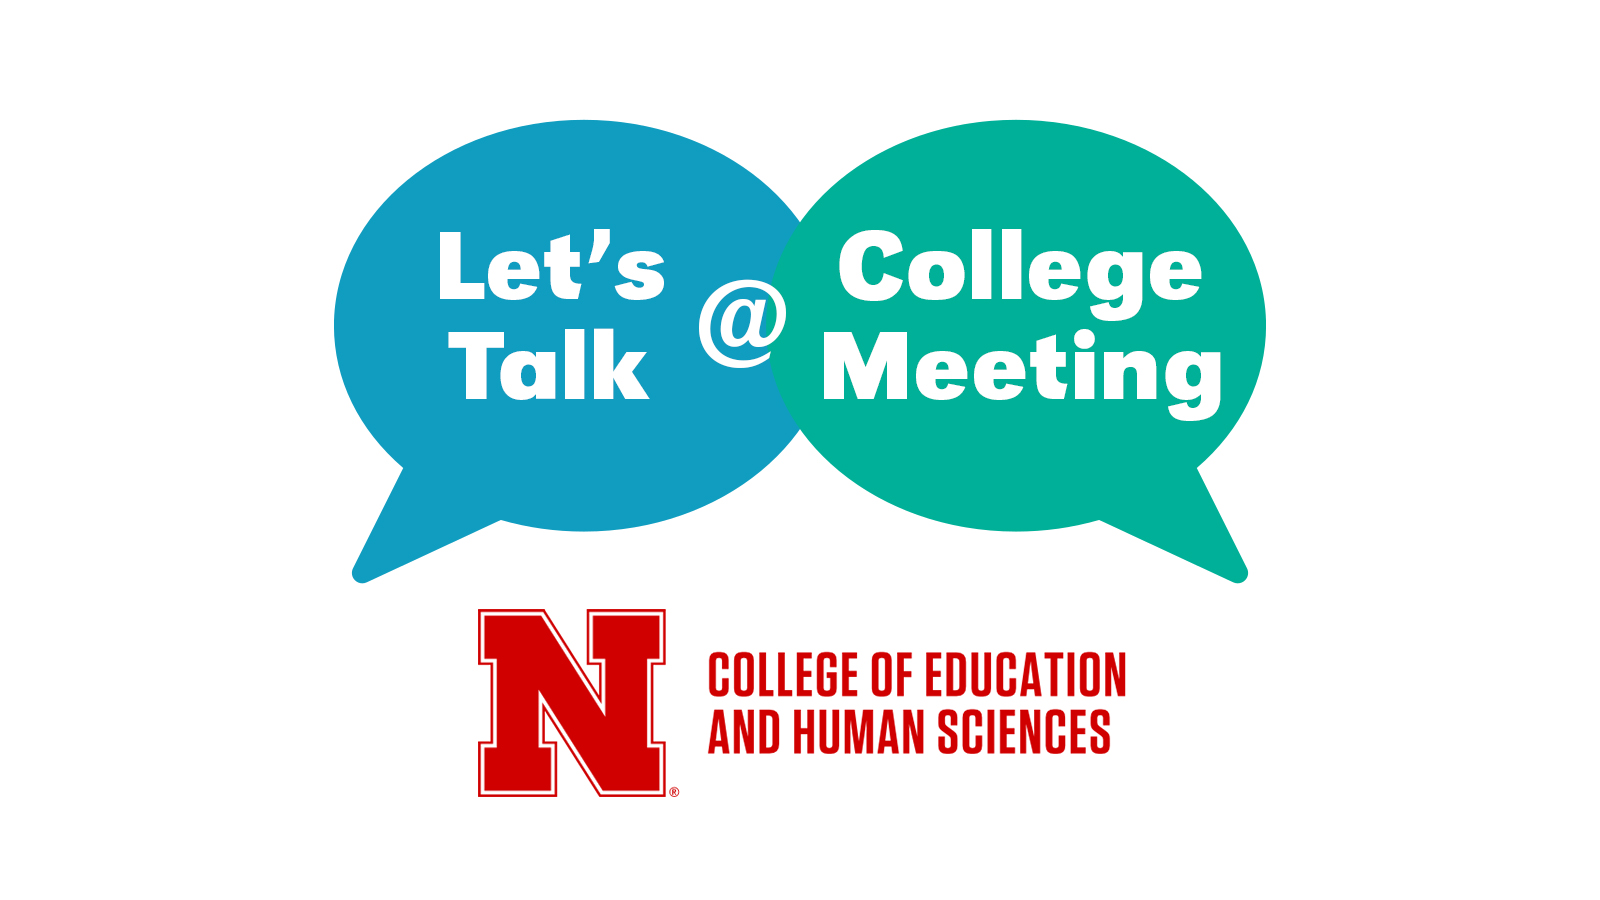 CEHS College Meeting February 1, 2019